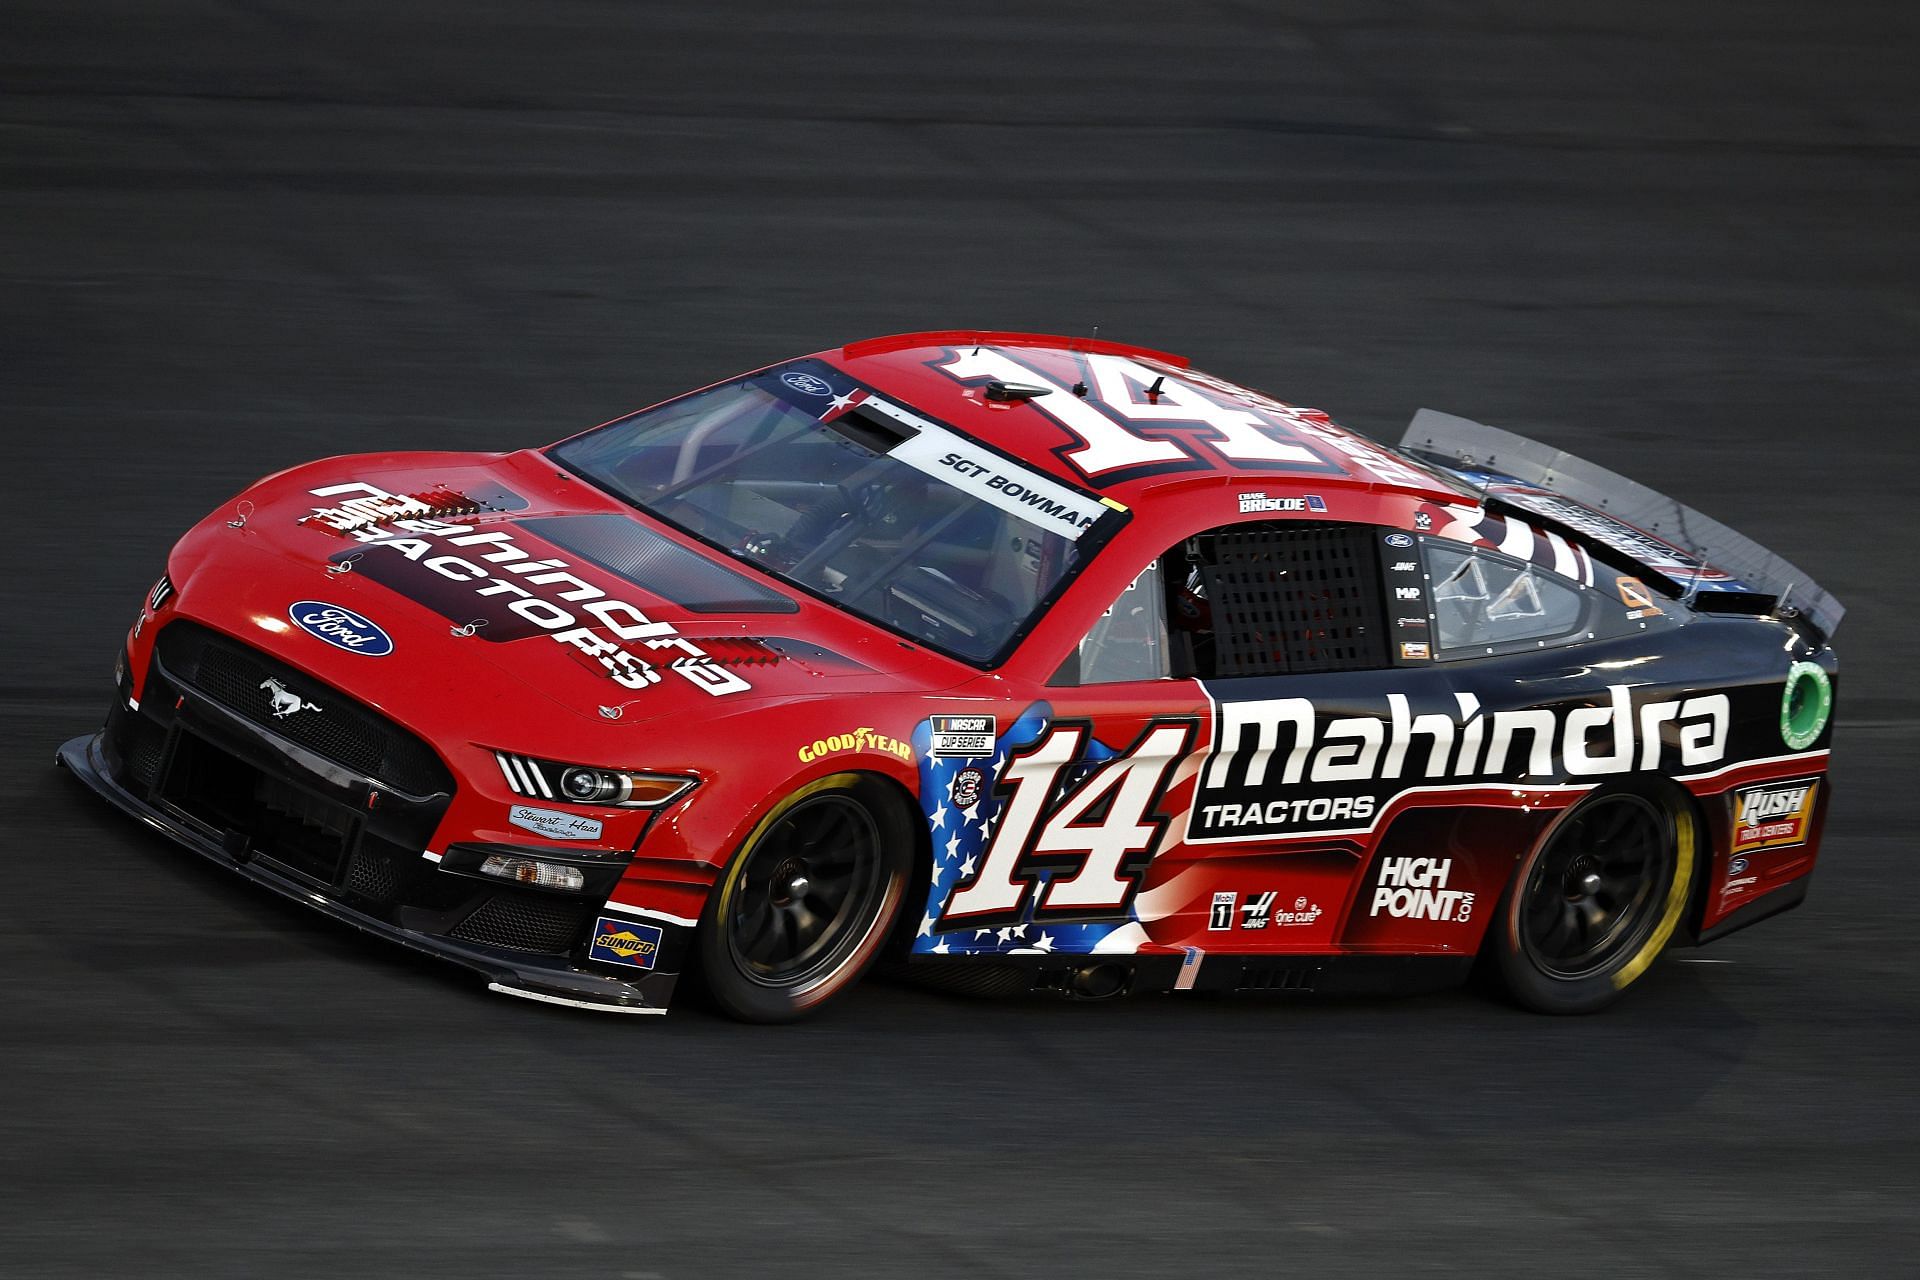 Chase Briscoe drives during qualifying for the 2022 NASCAR Cup Series Coca-Cola 600 at Charlotte Motor Speedway in Concord, North Carolina. (Photo by Jared C. Tilton/Getty Images)